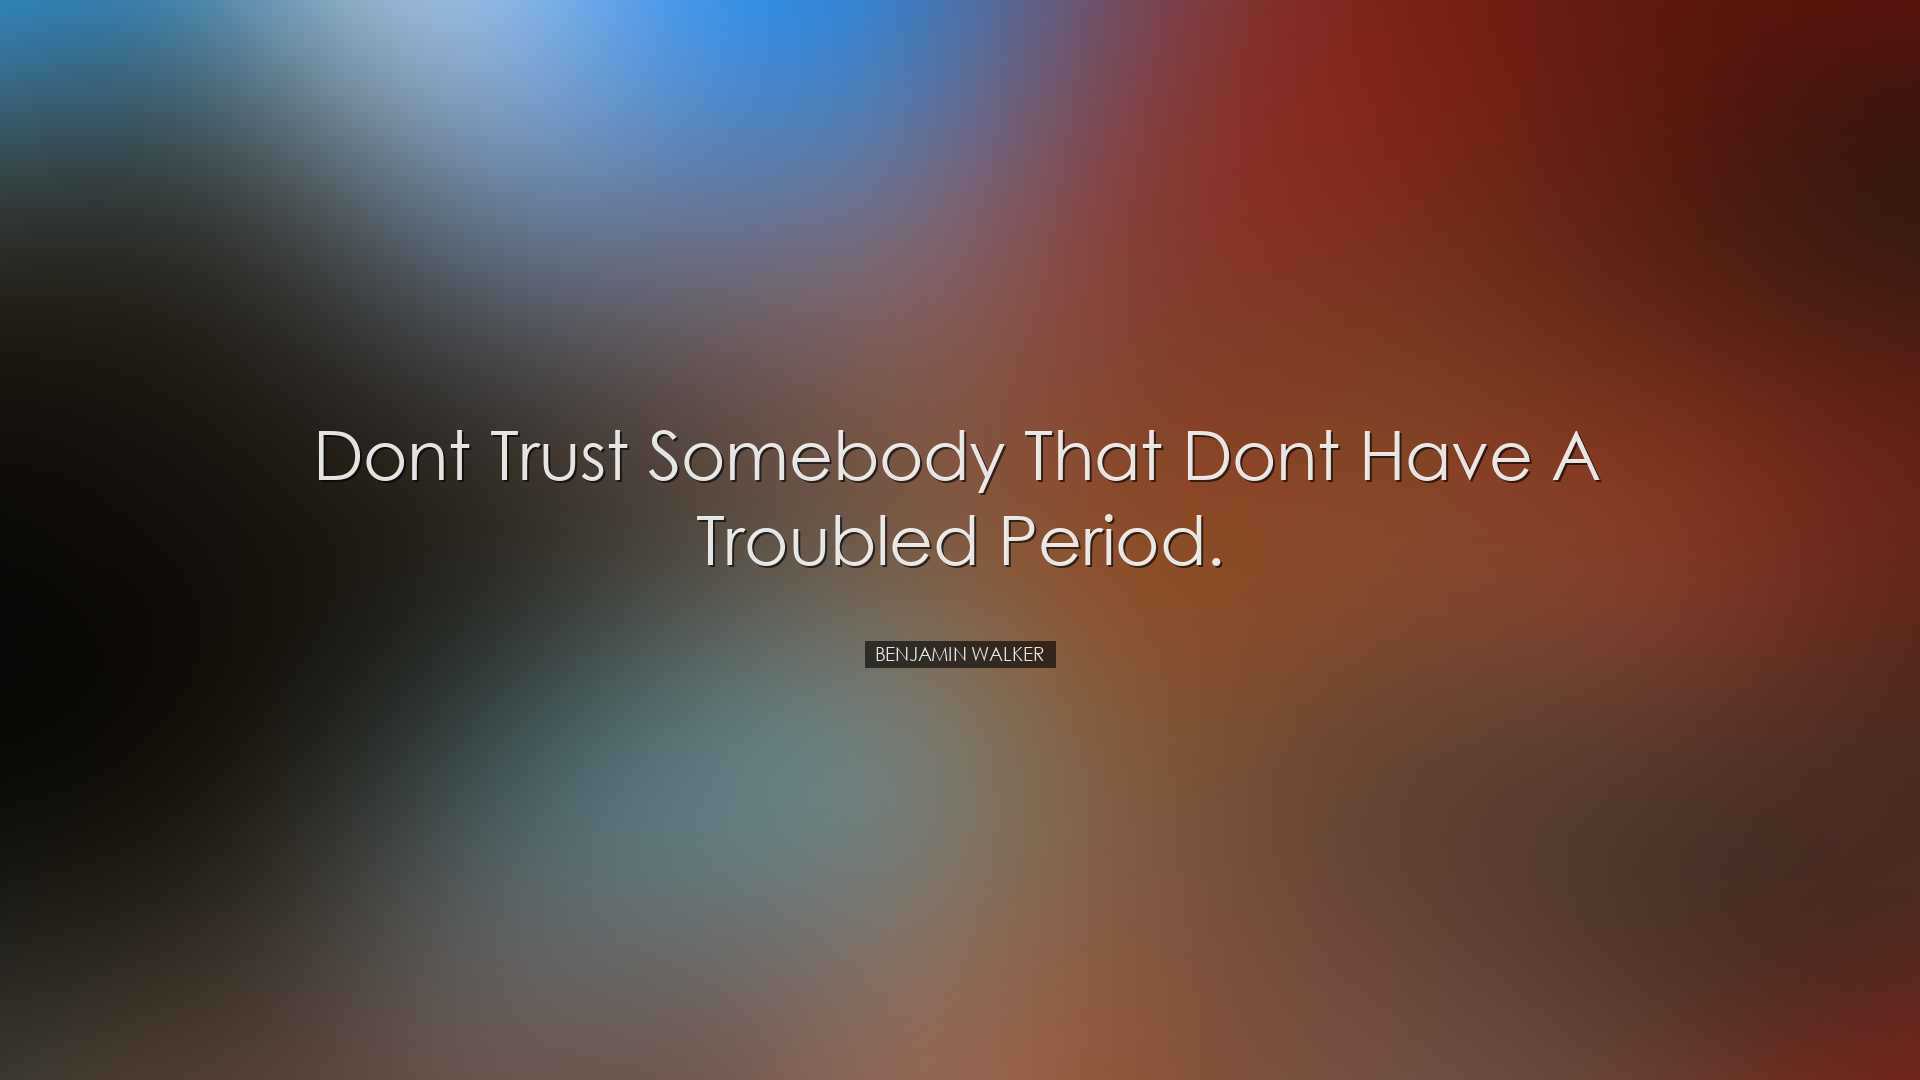 Dont trust somebody that dont have a troubled period. - Benjamin W